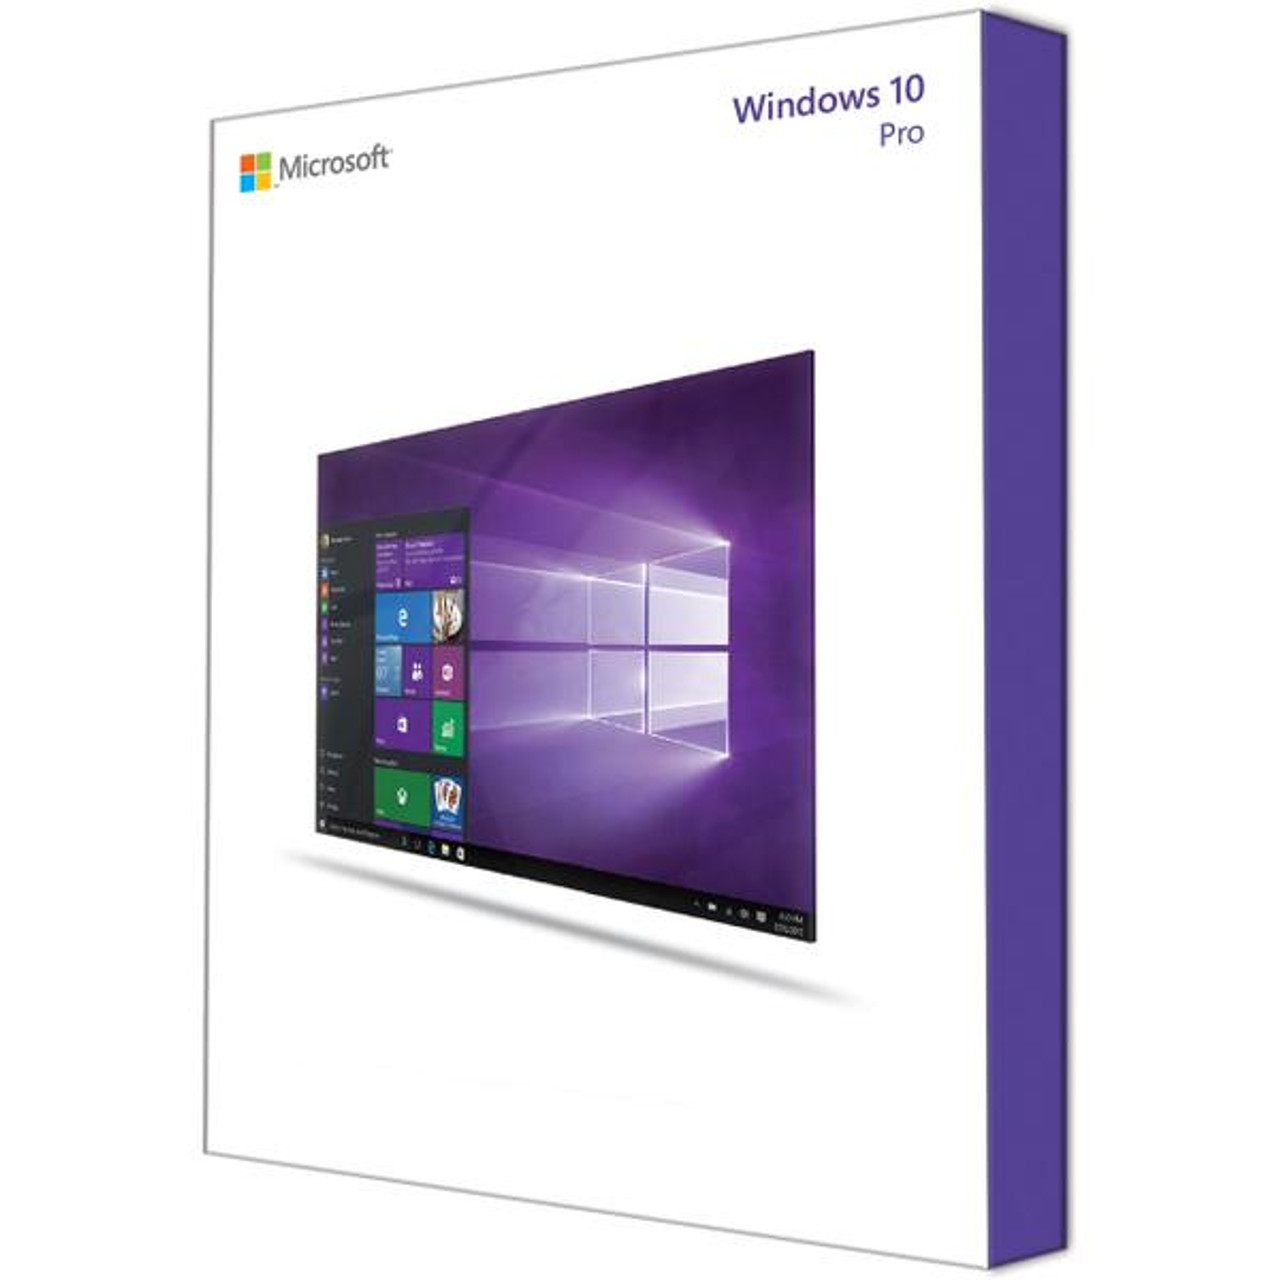 Windows 10  Pro  64-bit English - (LICENCE) (WITH SYSTEM PURCHASE ONLY)